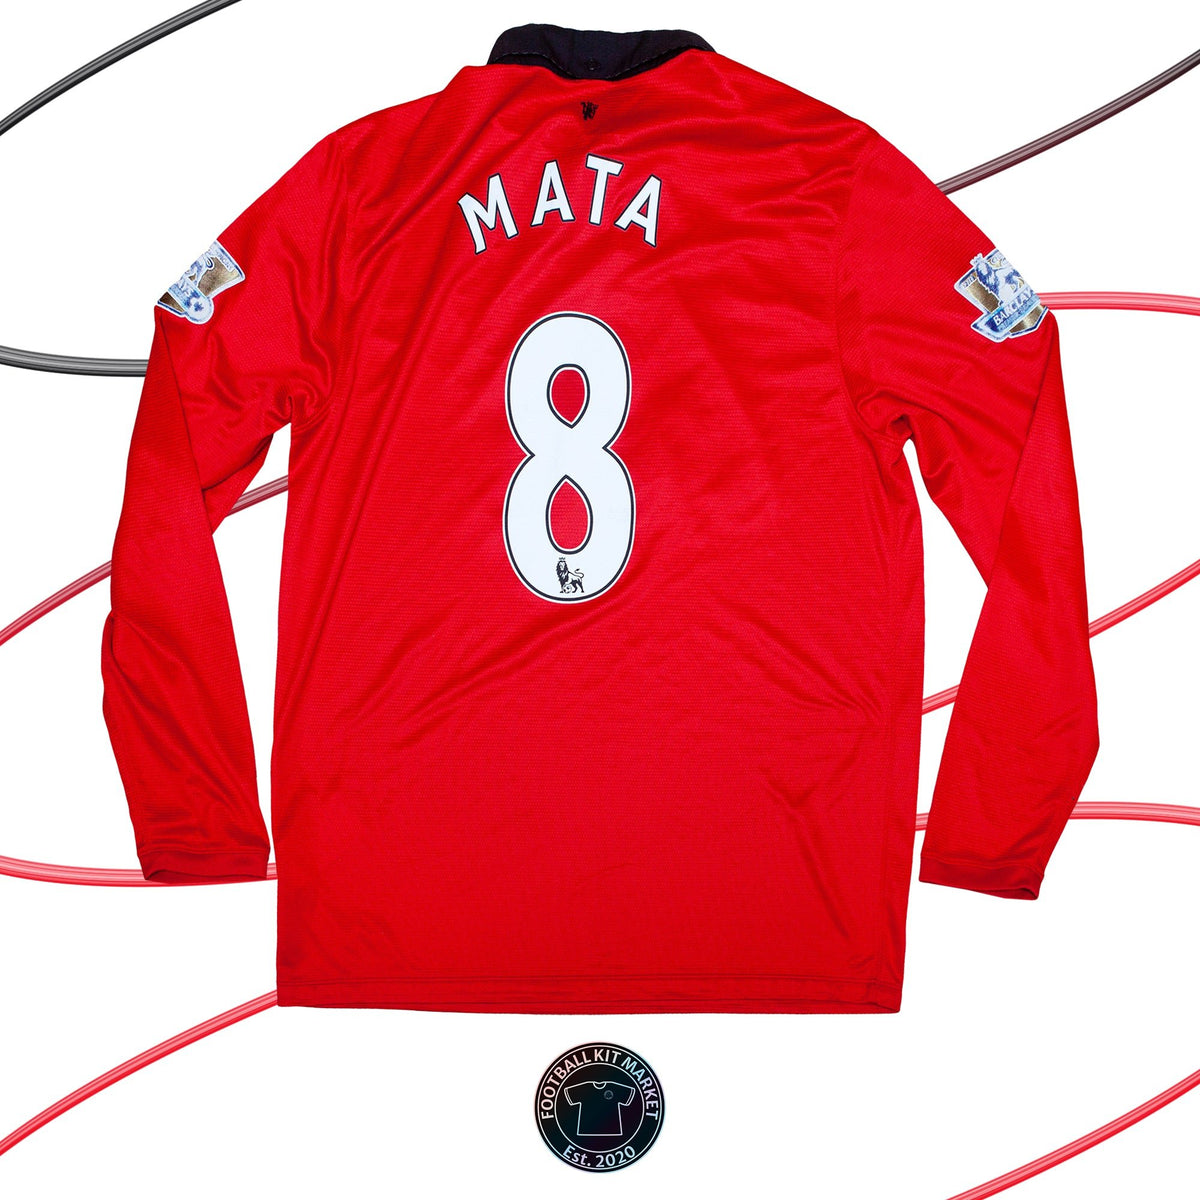 Genuine MANCHESTER UNITED Home Shirt MATA (2013-2014) - NIKE (XL) - Product Image from Football Kit Market